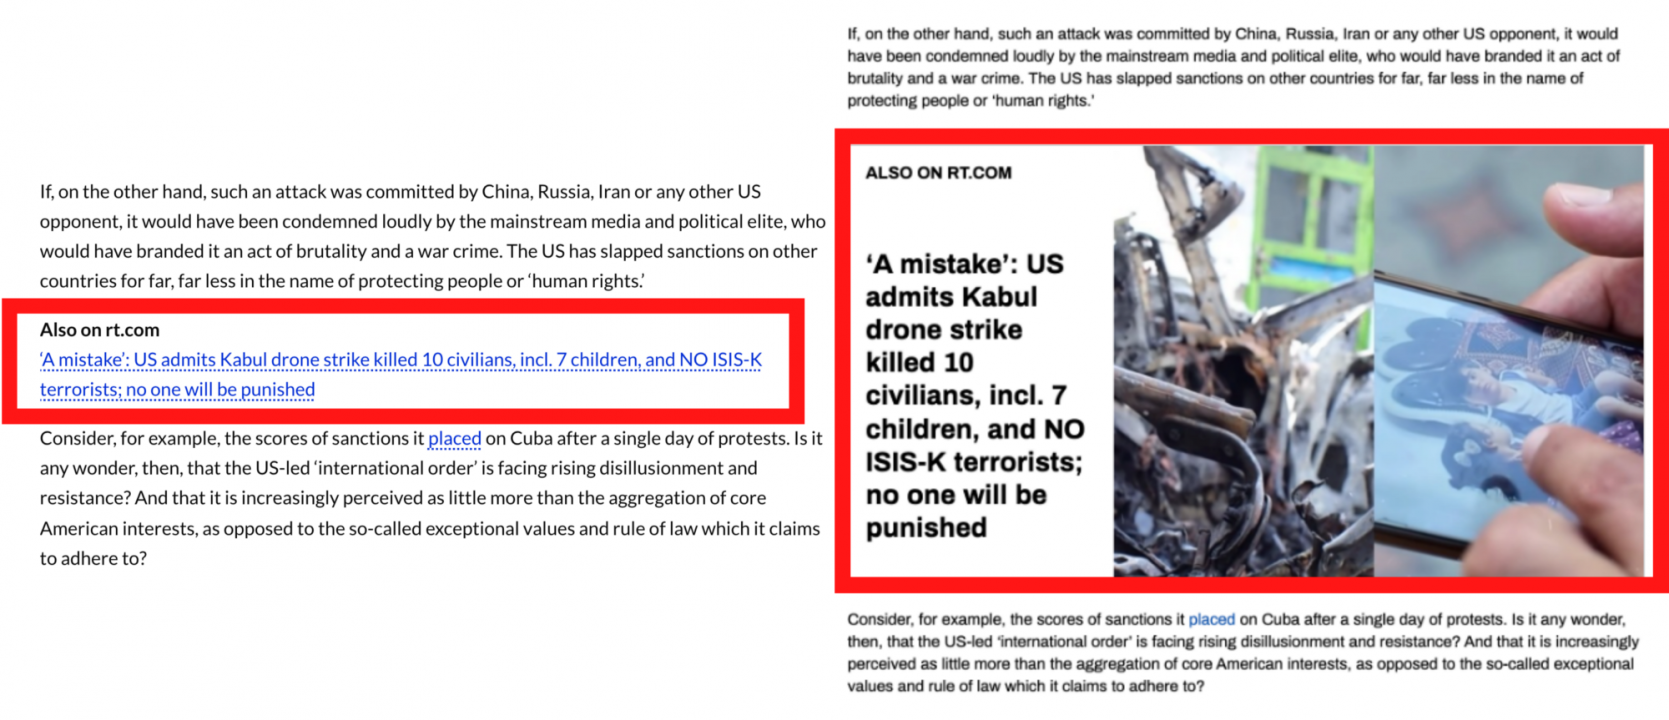 Example of an article from the Conservative Beaver (left) including a text version of the same promotional link (red boxes) used in RT’s original version of the story (right) at the same point in the article.